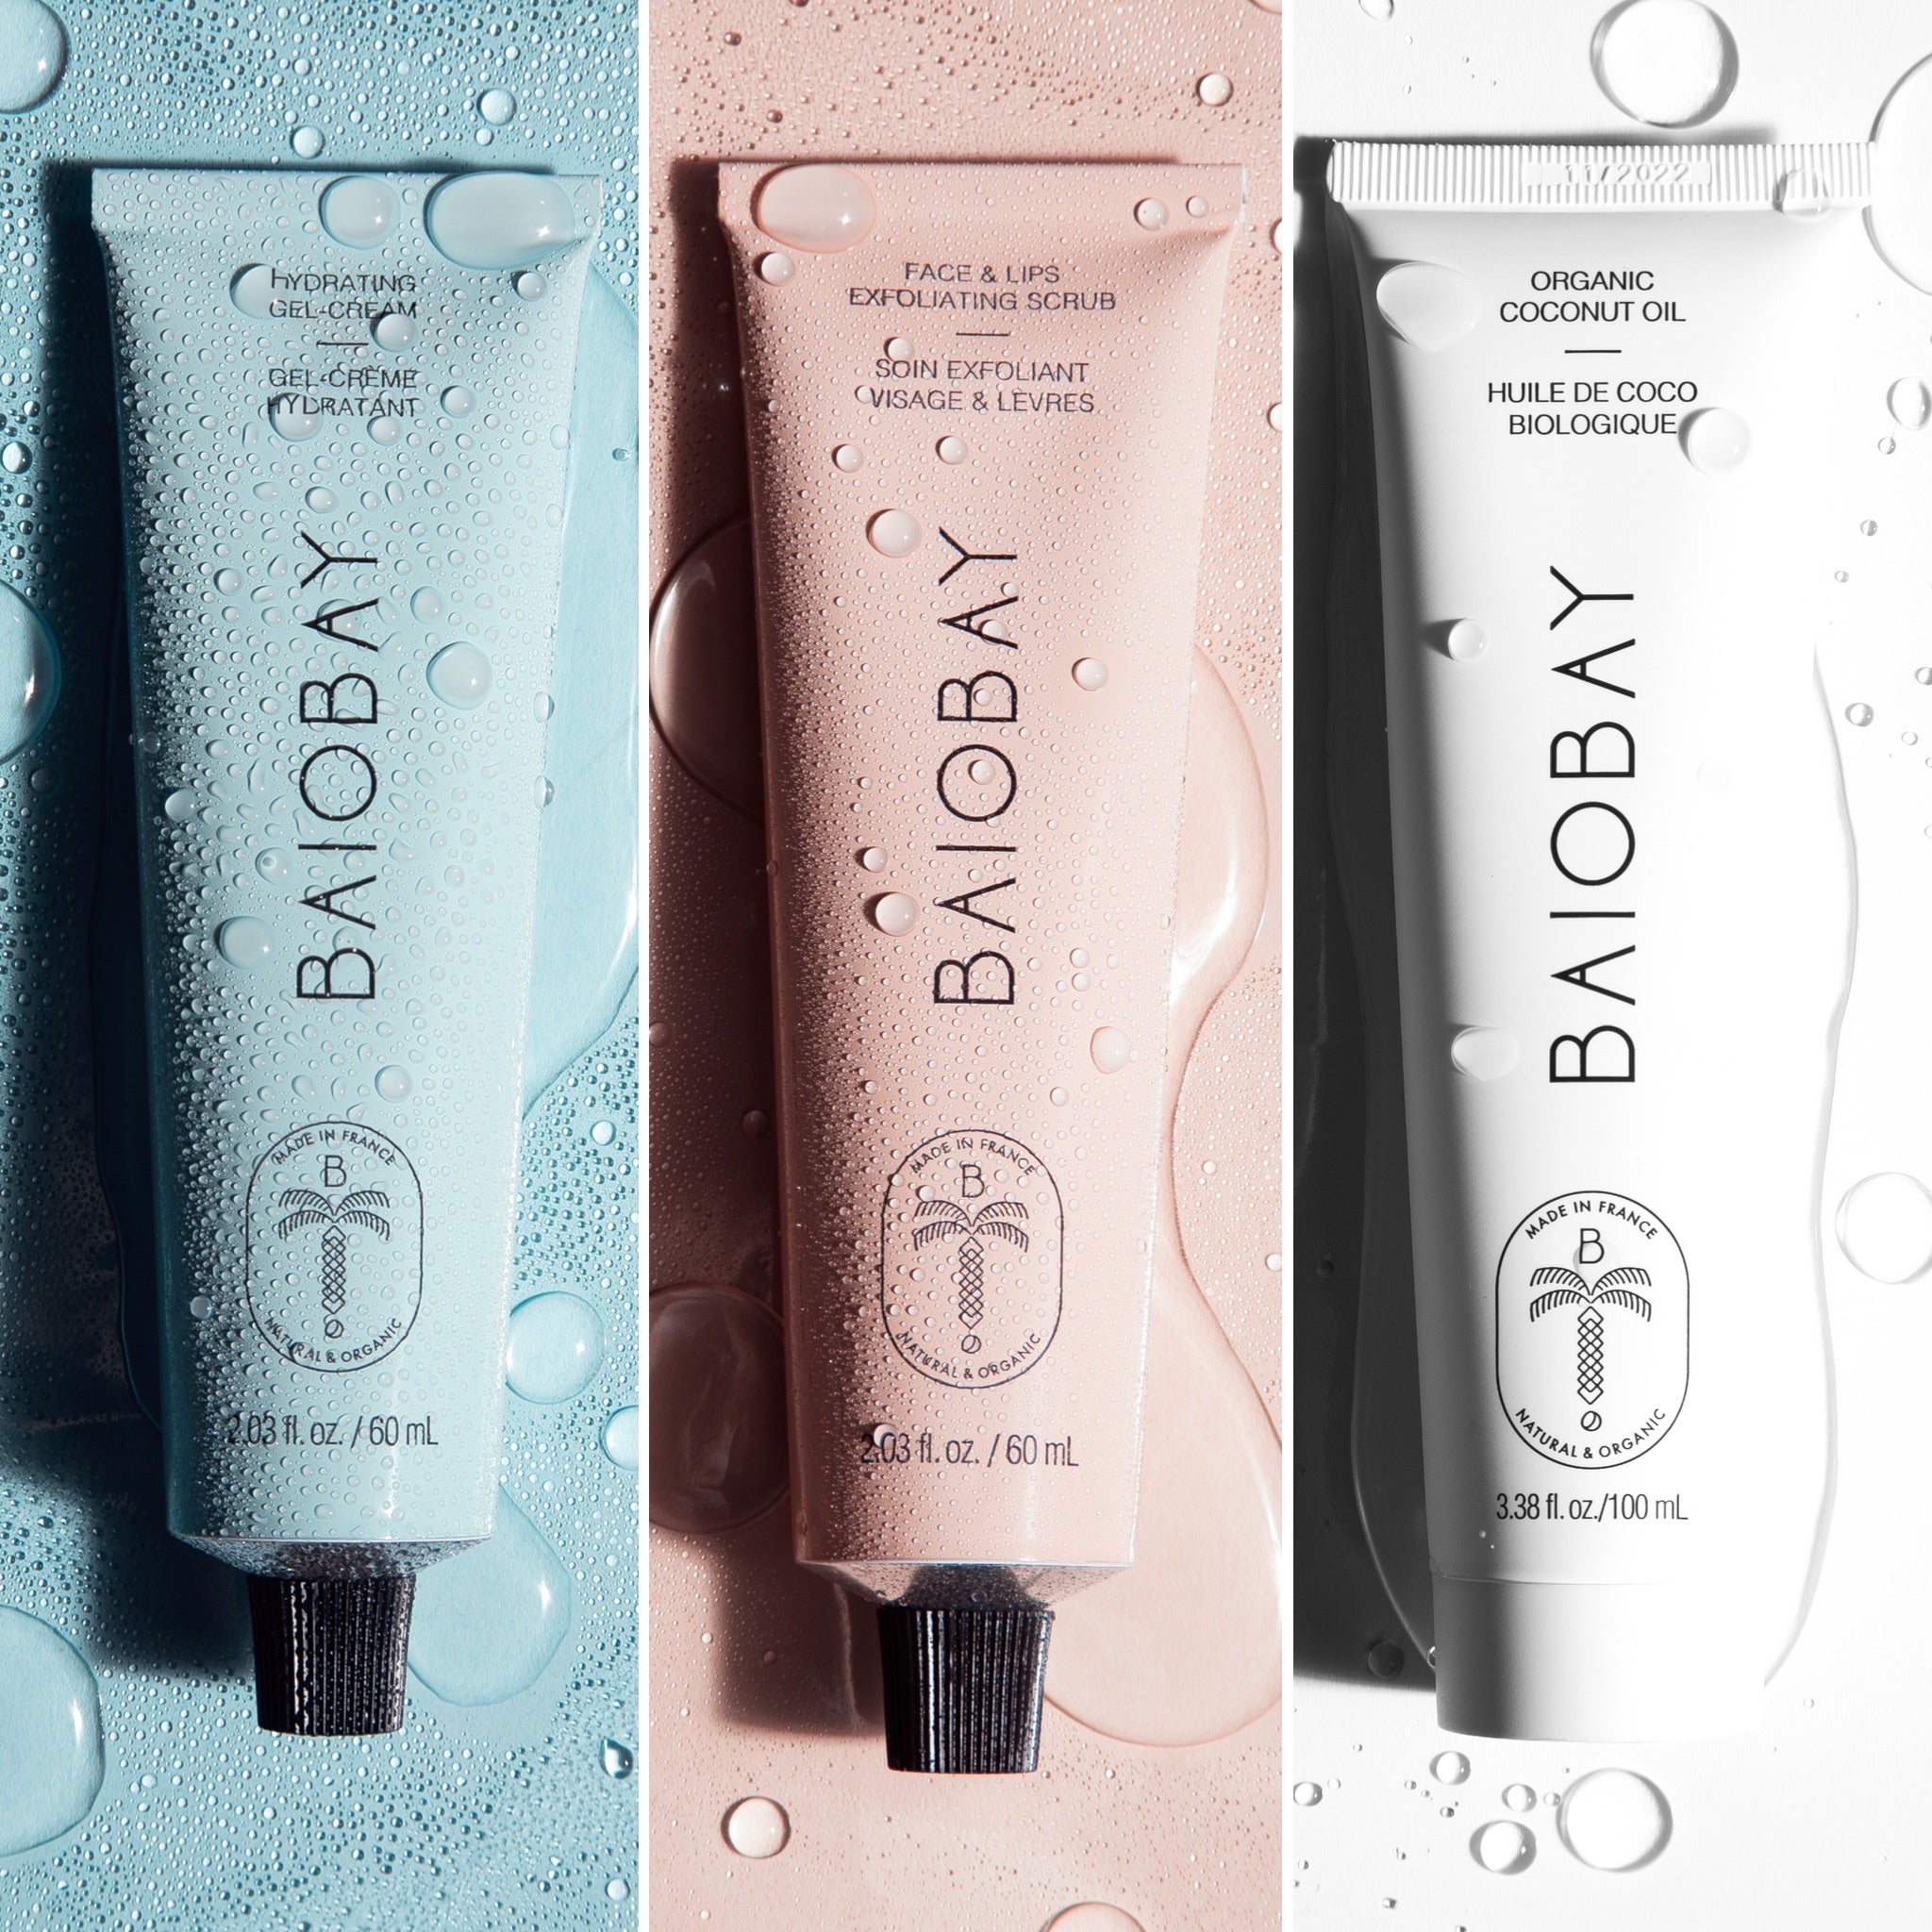 BAIOBAY - Trio I want it all (Gel crème + gommage + huile)